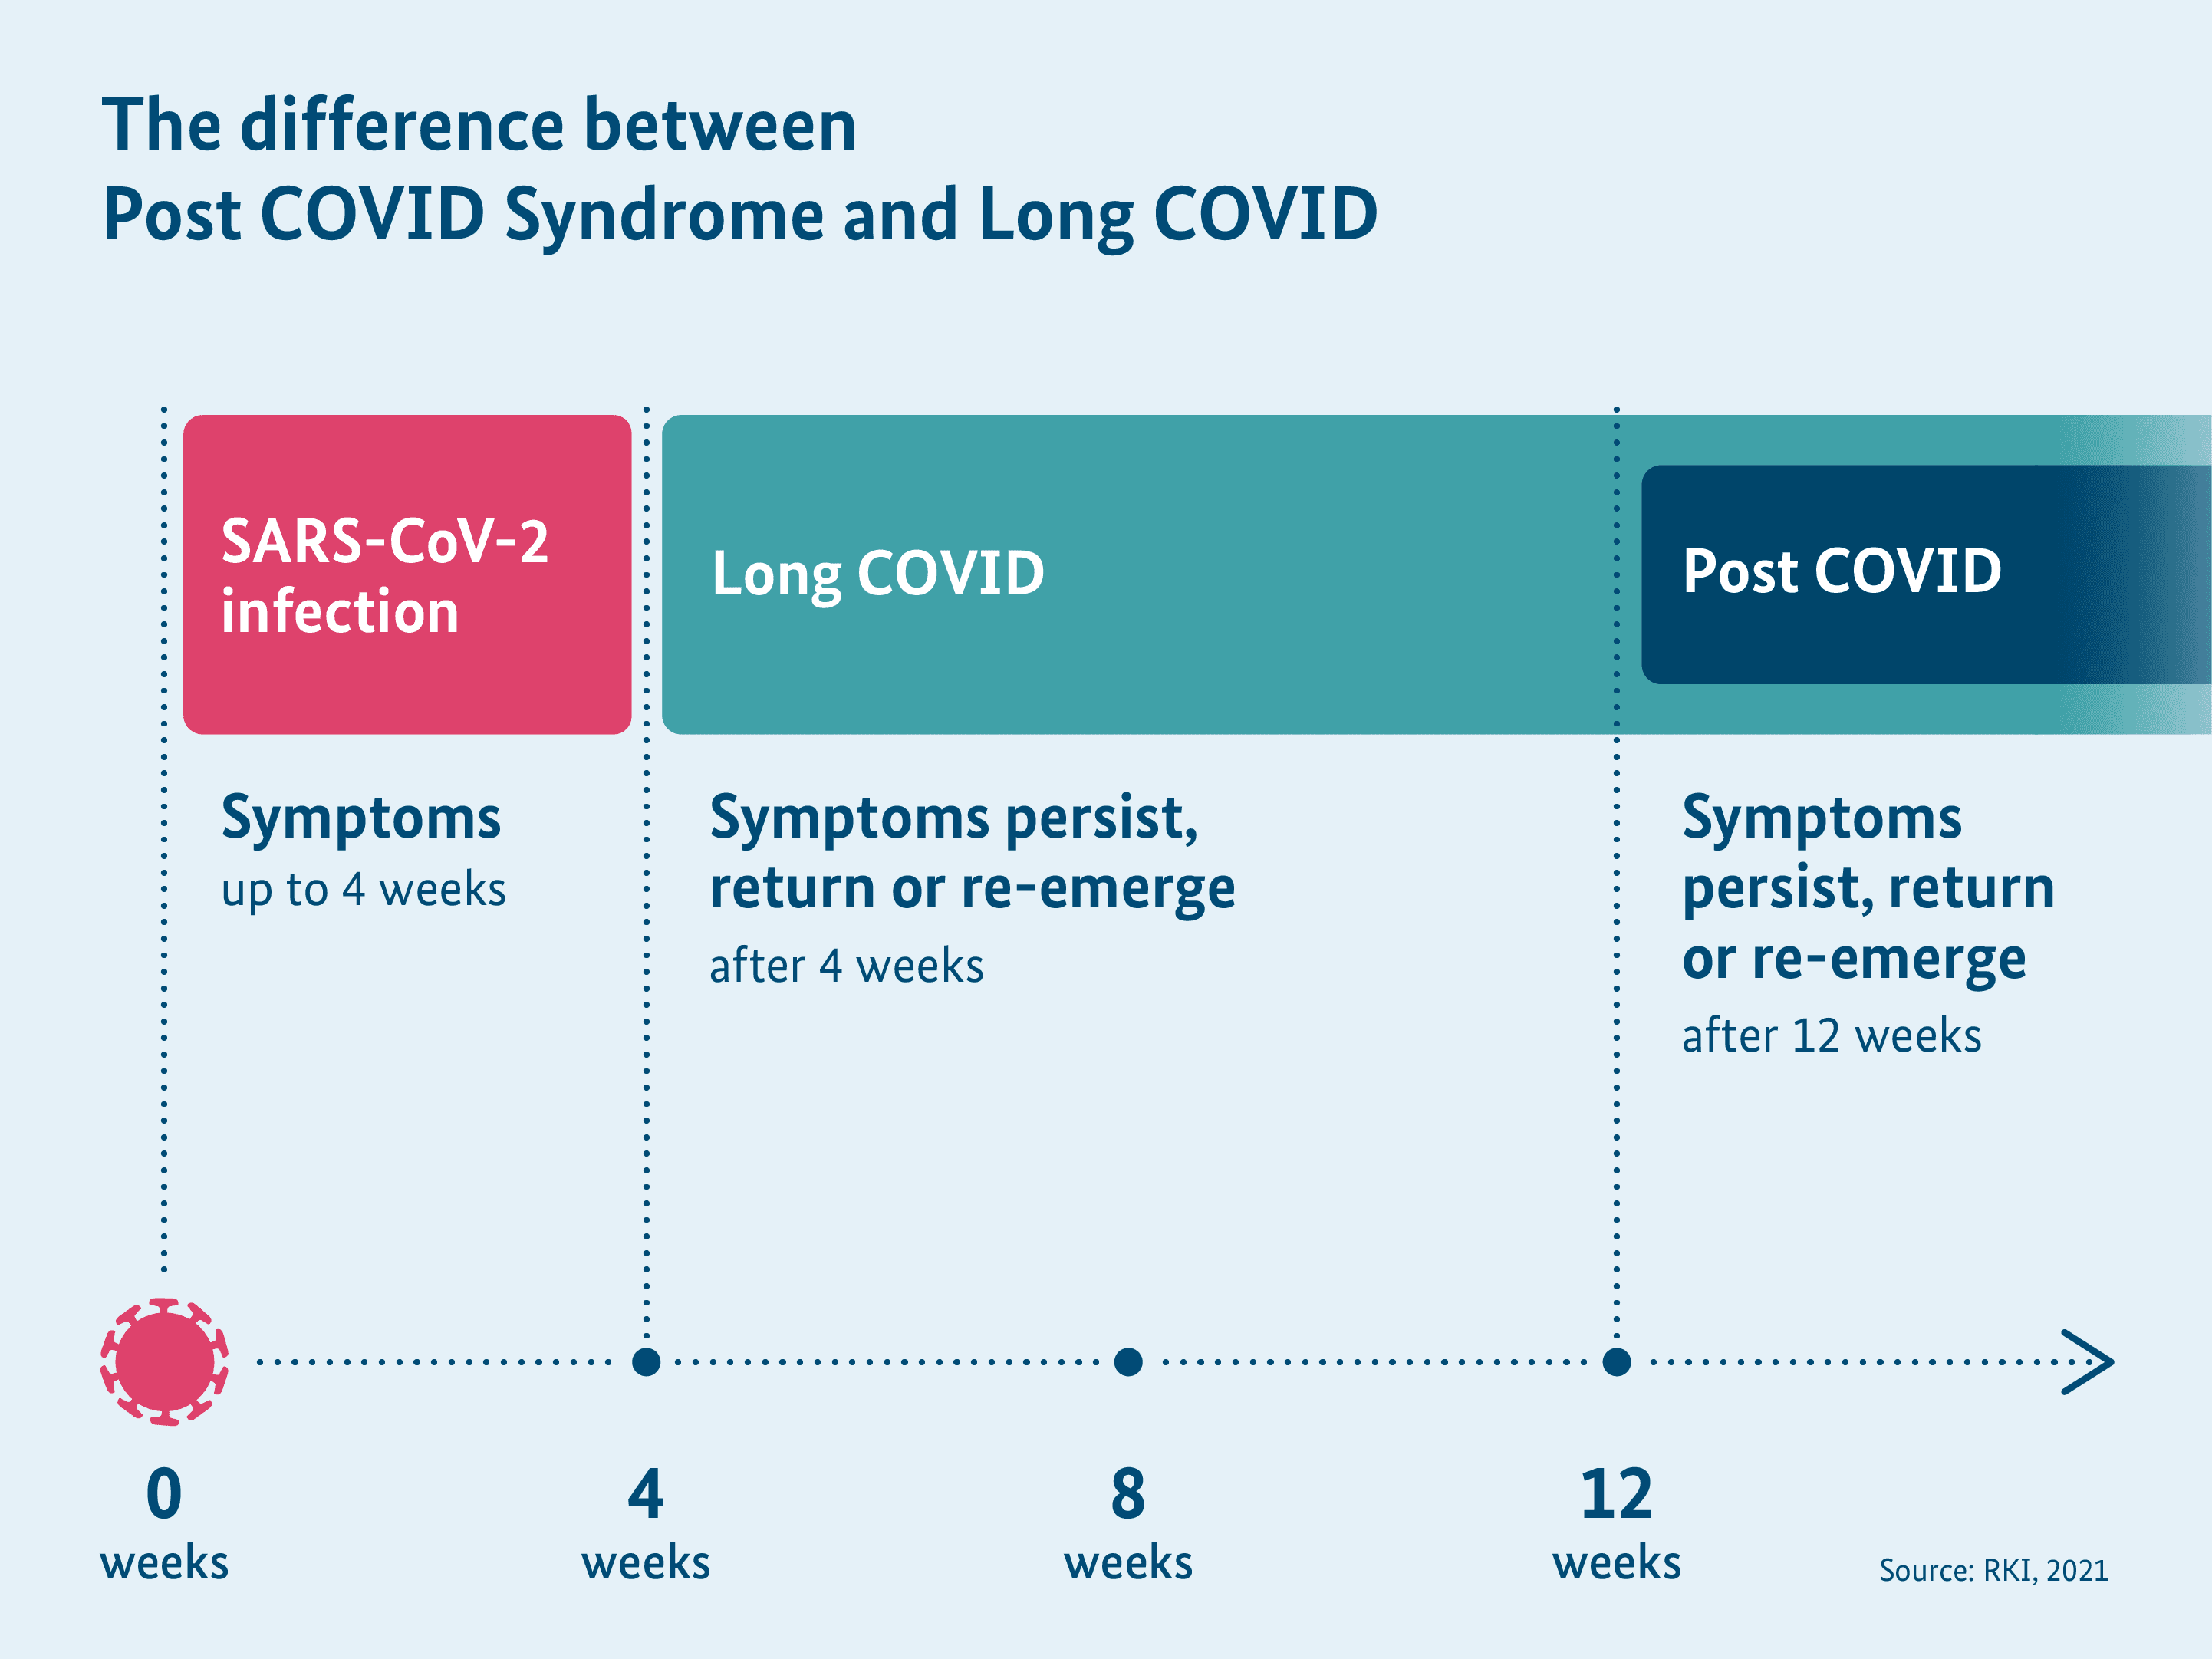 Diagram: Difference between Post COVID and Long COVID based on time course of symptoms